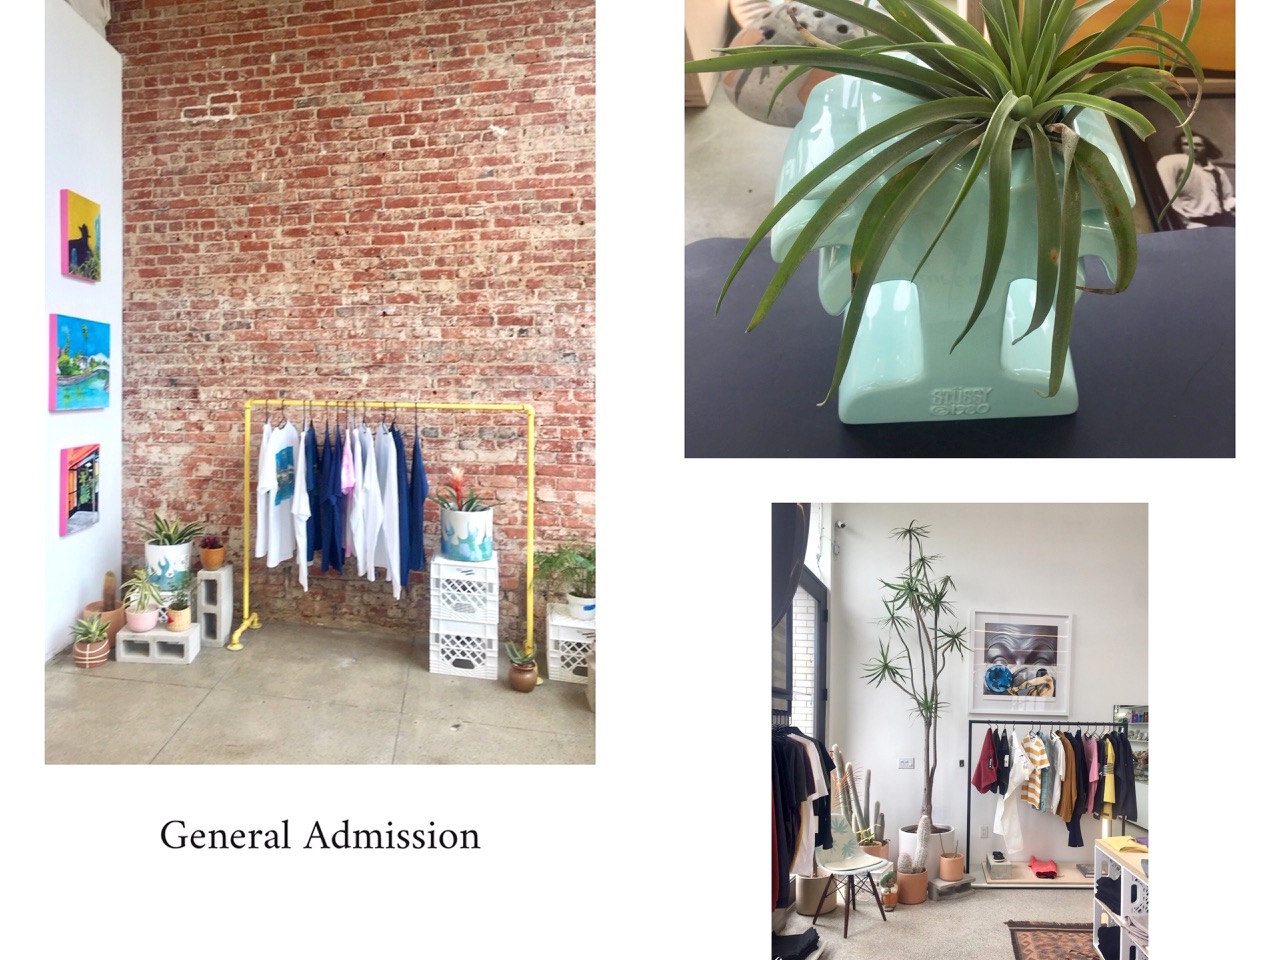 general admission, venice beach,shopping,surf shop,travel,travel guide,the piece collective,concept-store,abbot kinney